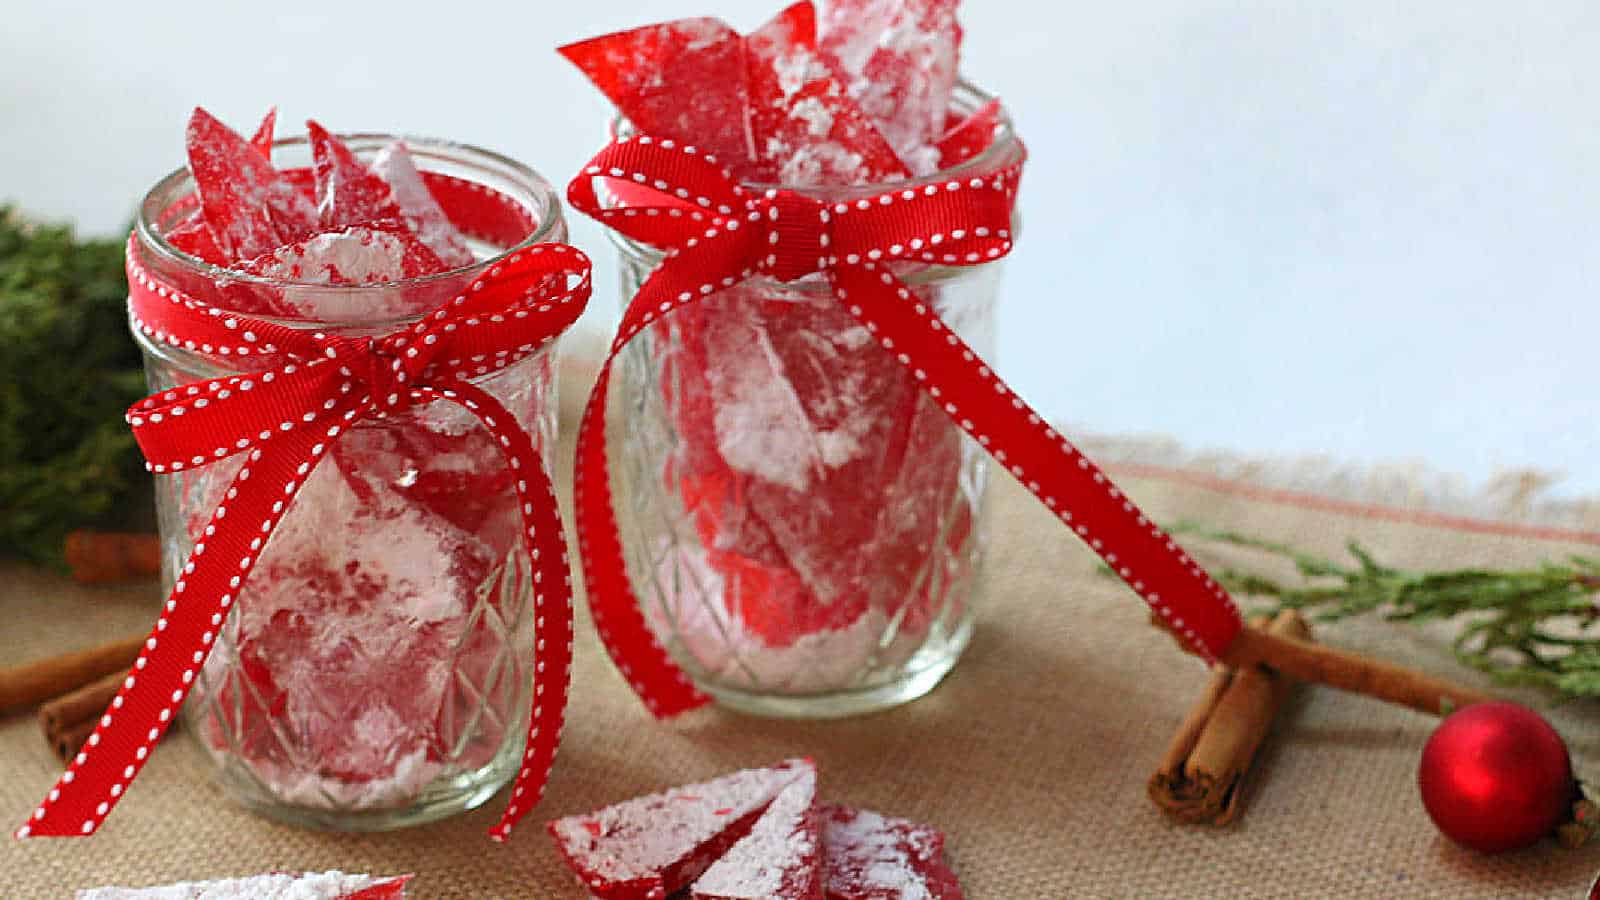 Cinnamon rock candy in glass jars with red ribbons.